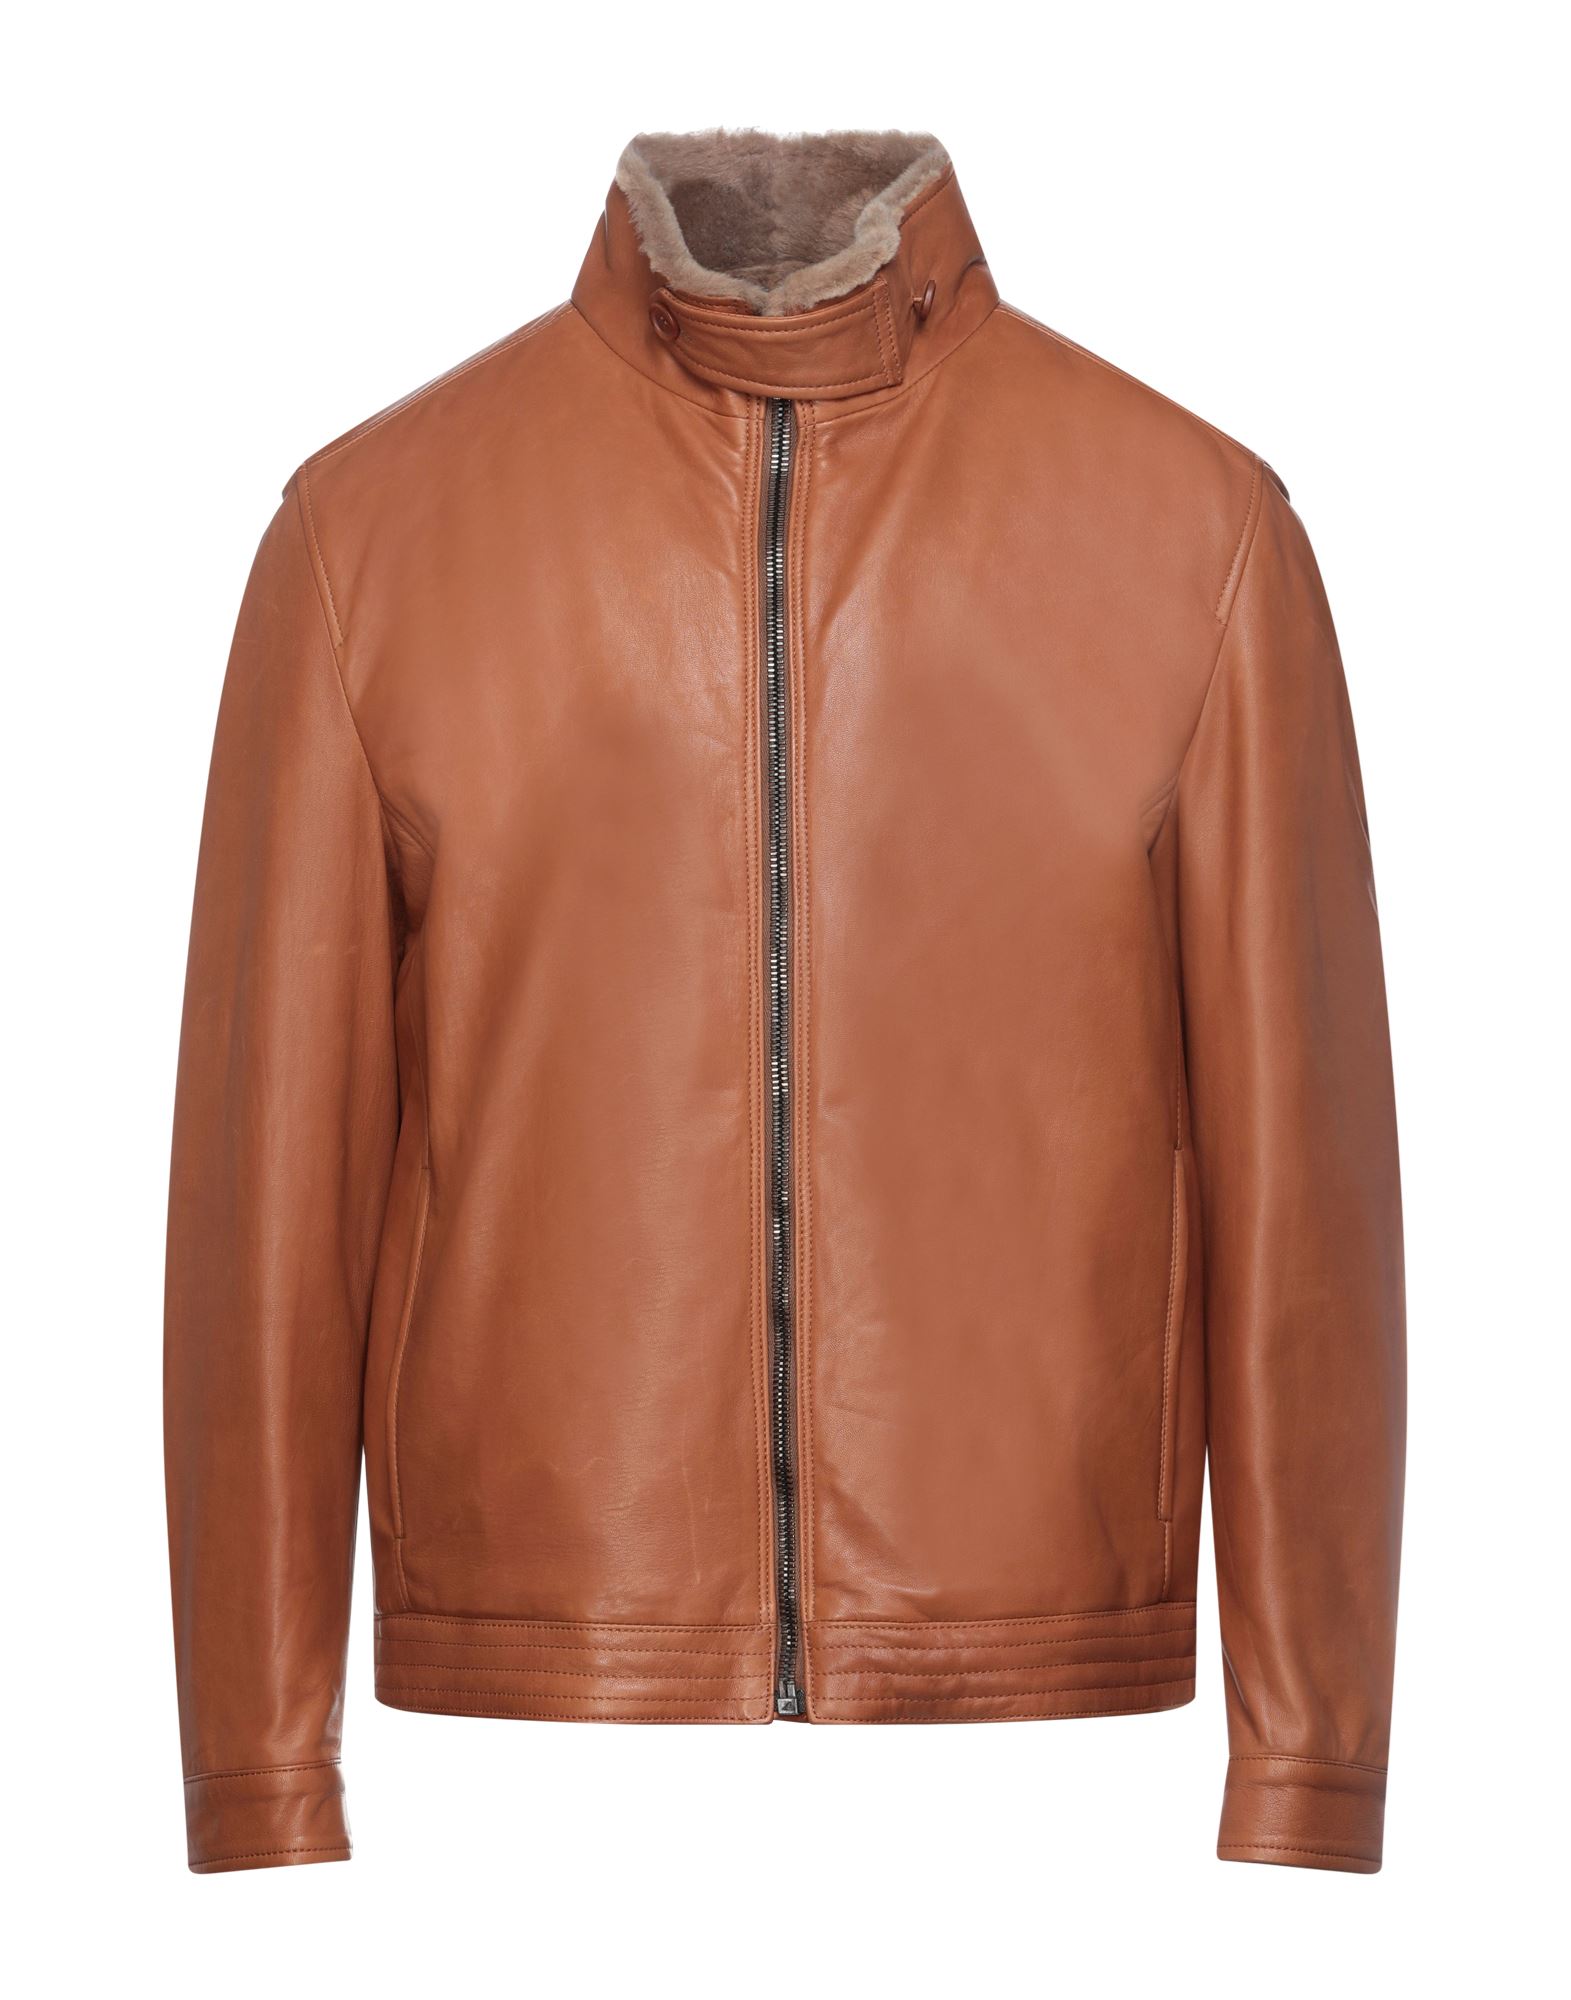 LATINI FINEST LEATHER JACKETS,16018381AT 6